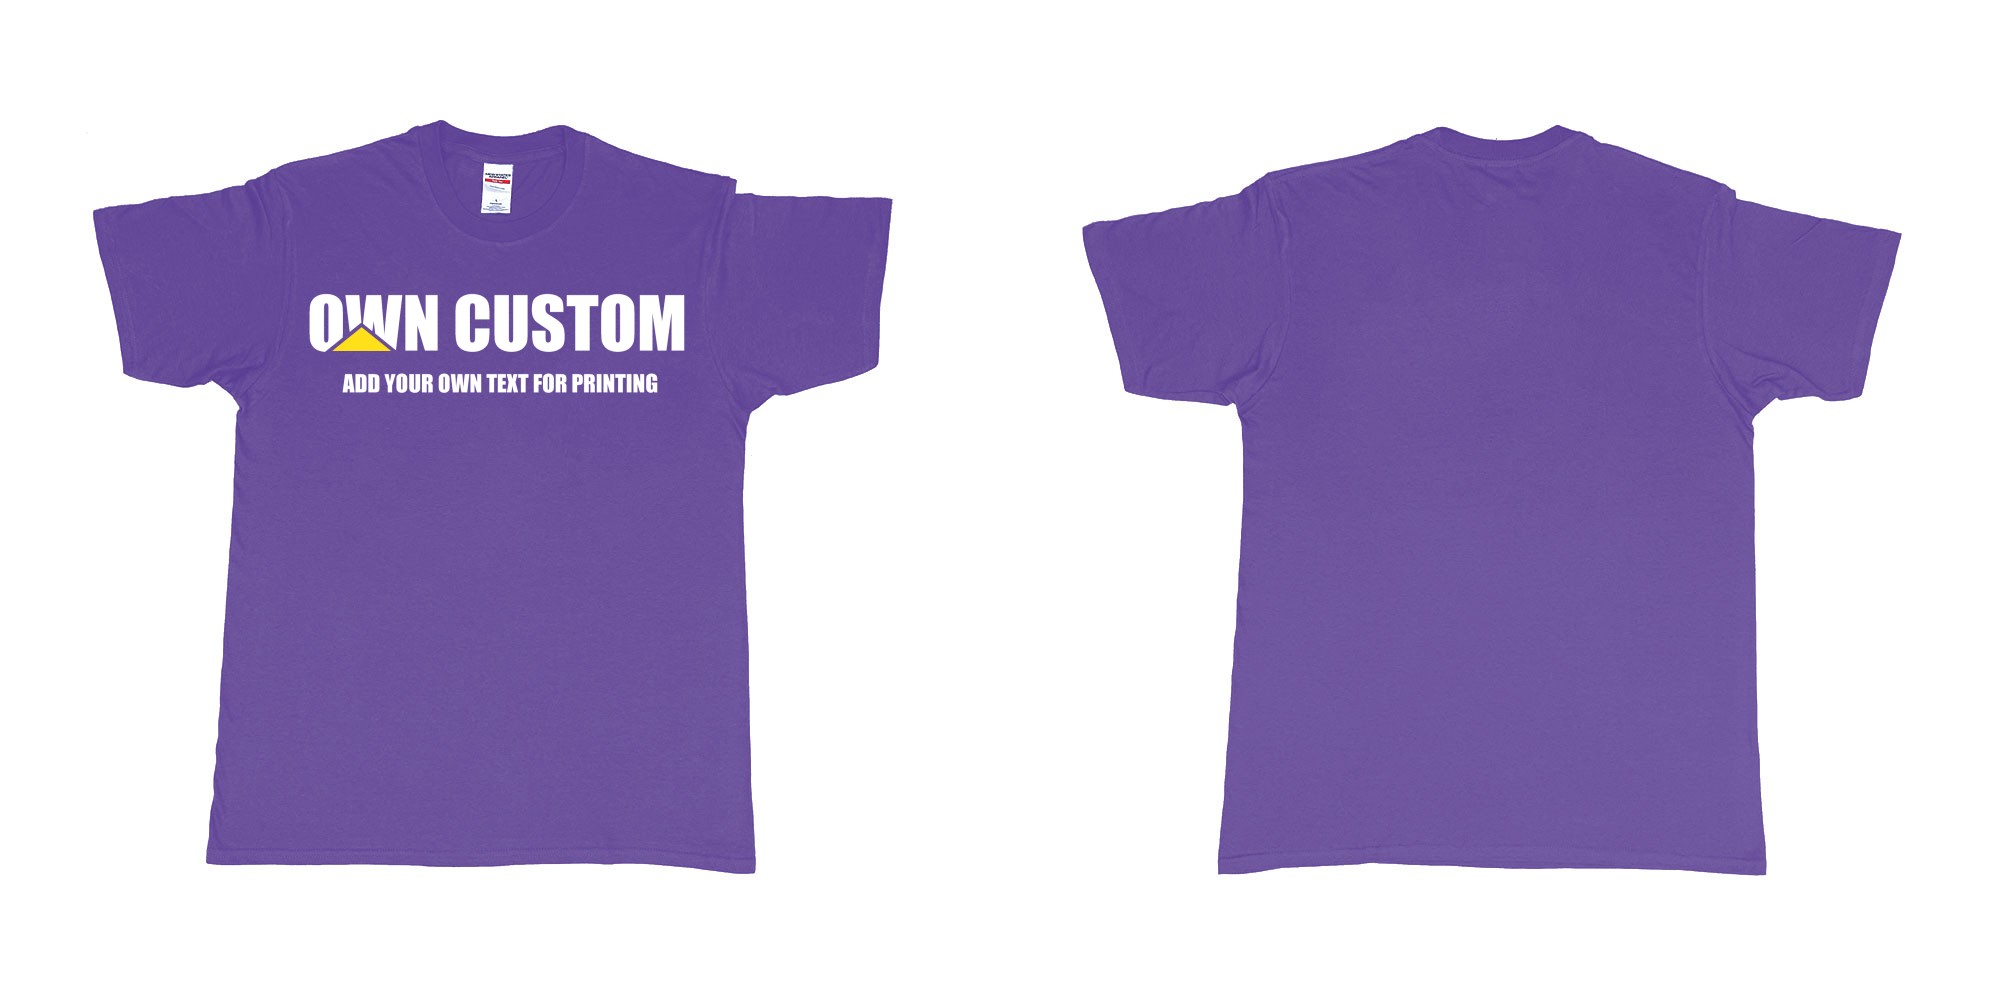 Custom tshirt design caterpillar inc logo custom text printing shirt in fabric color purple choice your own text made in Bali by The Pirate Way